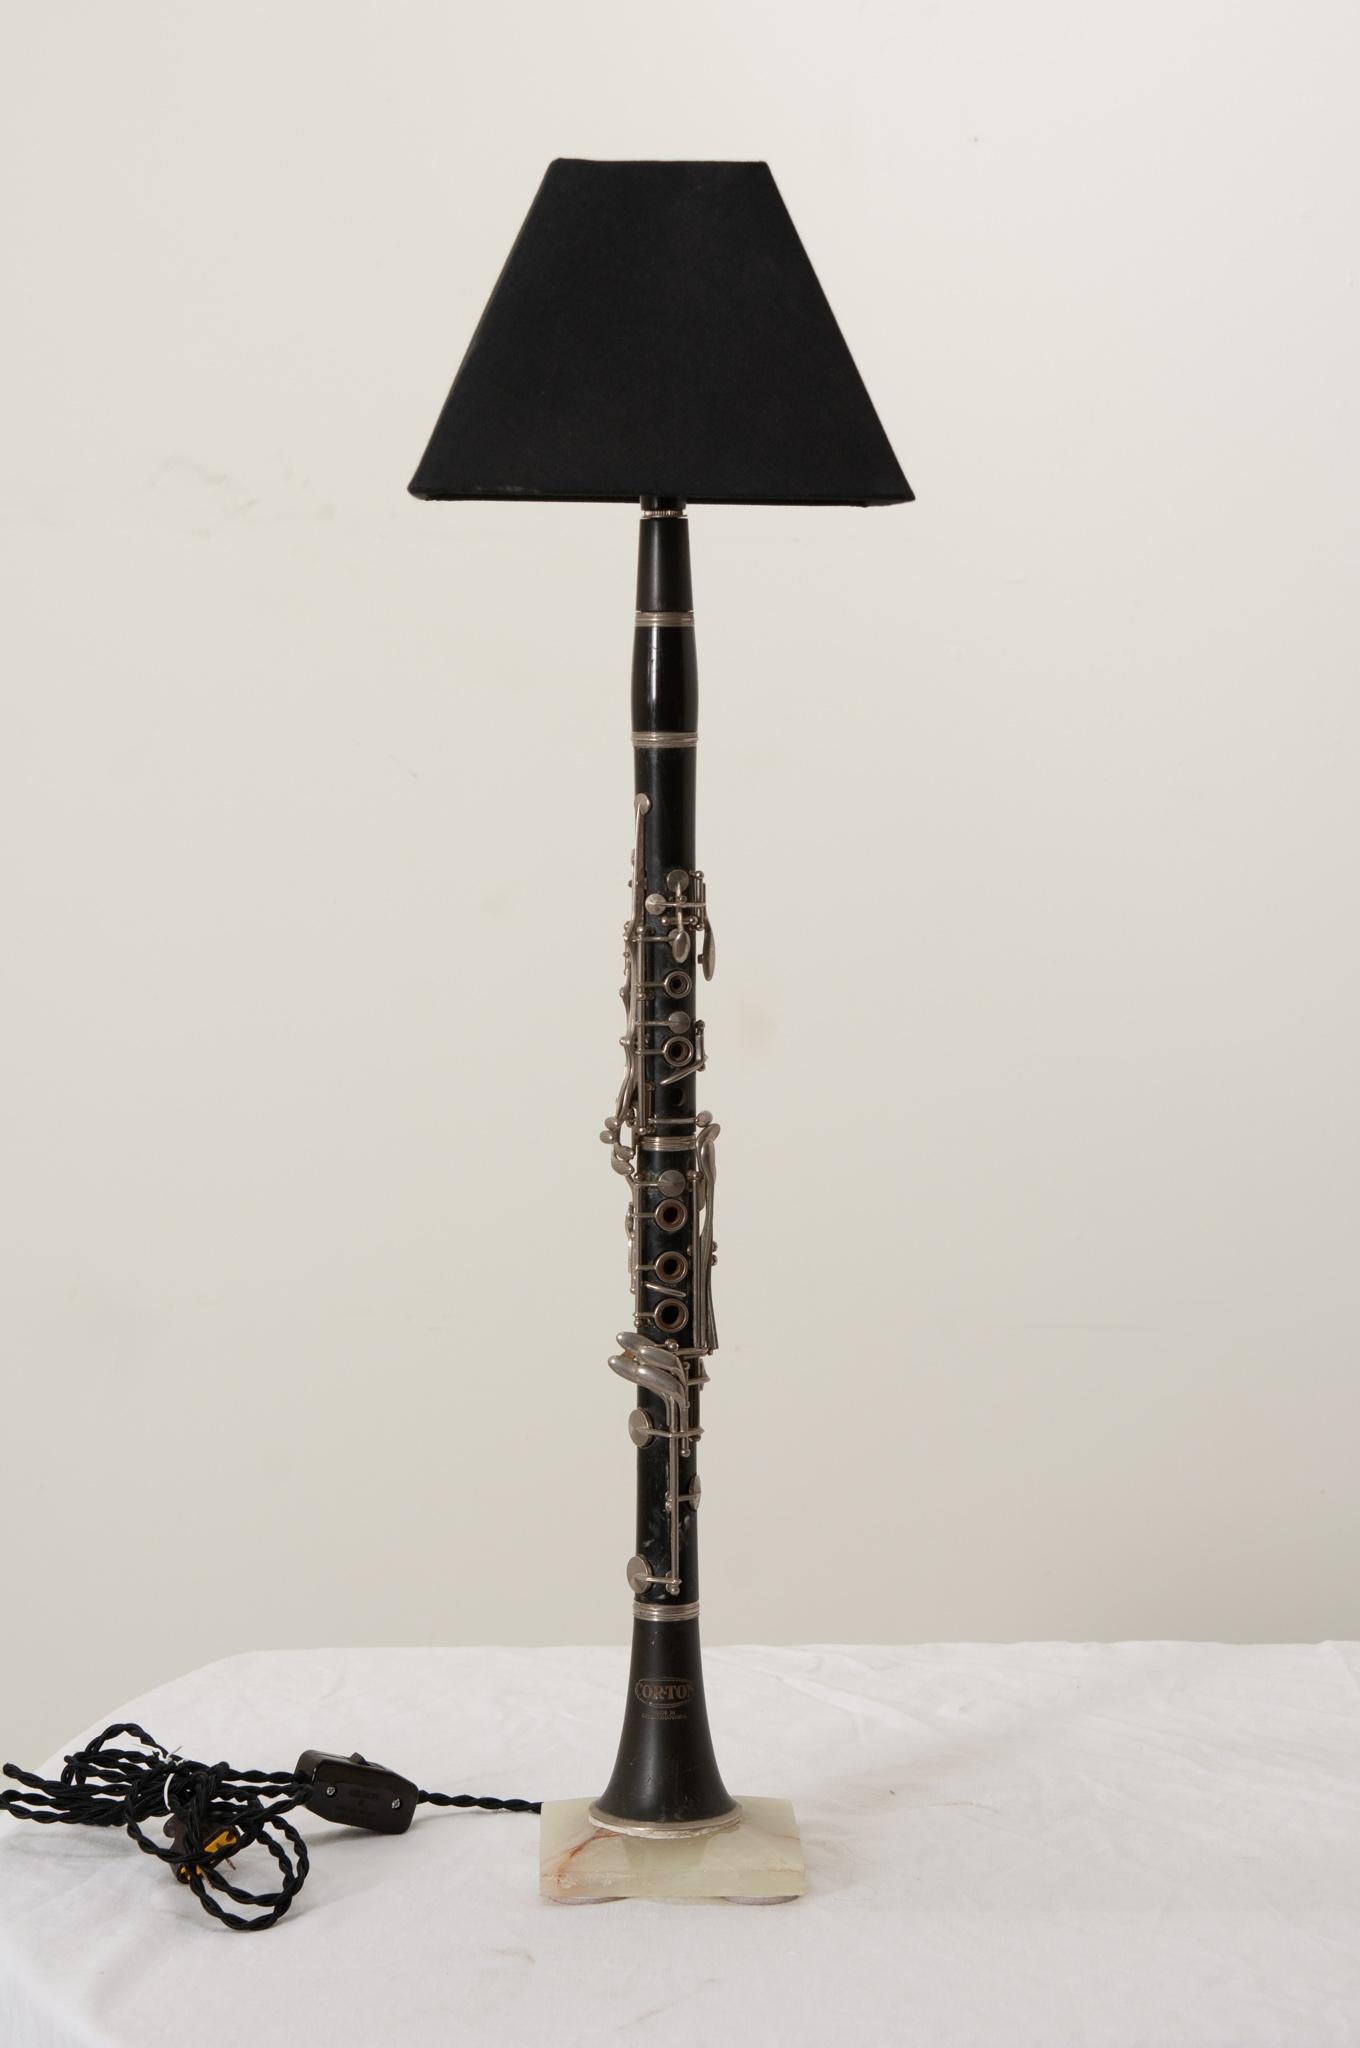 A vintage Corton clarinet made in Czechoslovakia and upcycled into a fabulous table lamp mounted on a beautiful onyx base with a vintage black silk shade. The clarinet shows signs of being a much loved and used musical instrument and its shape and